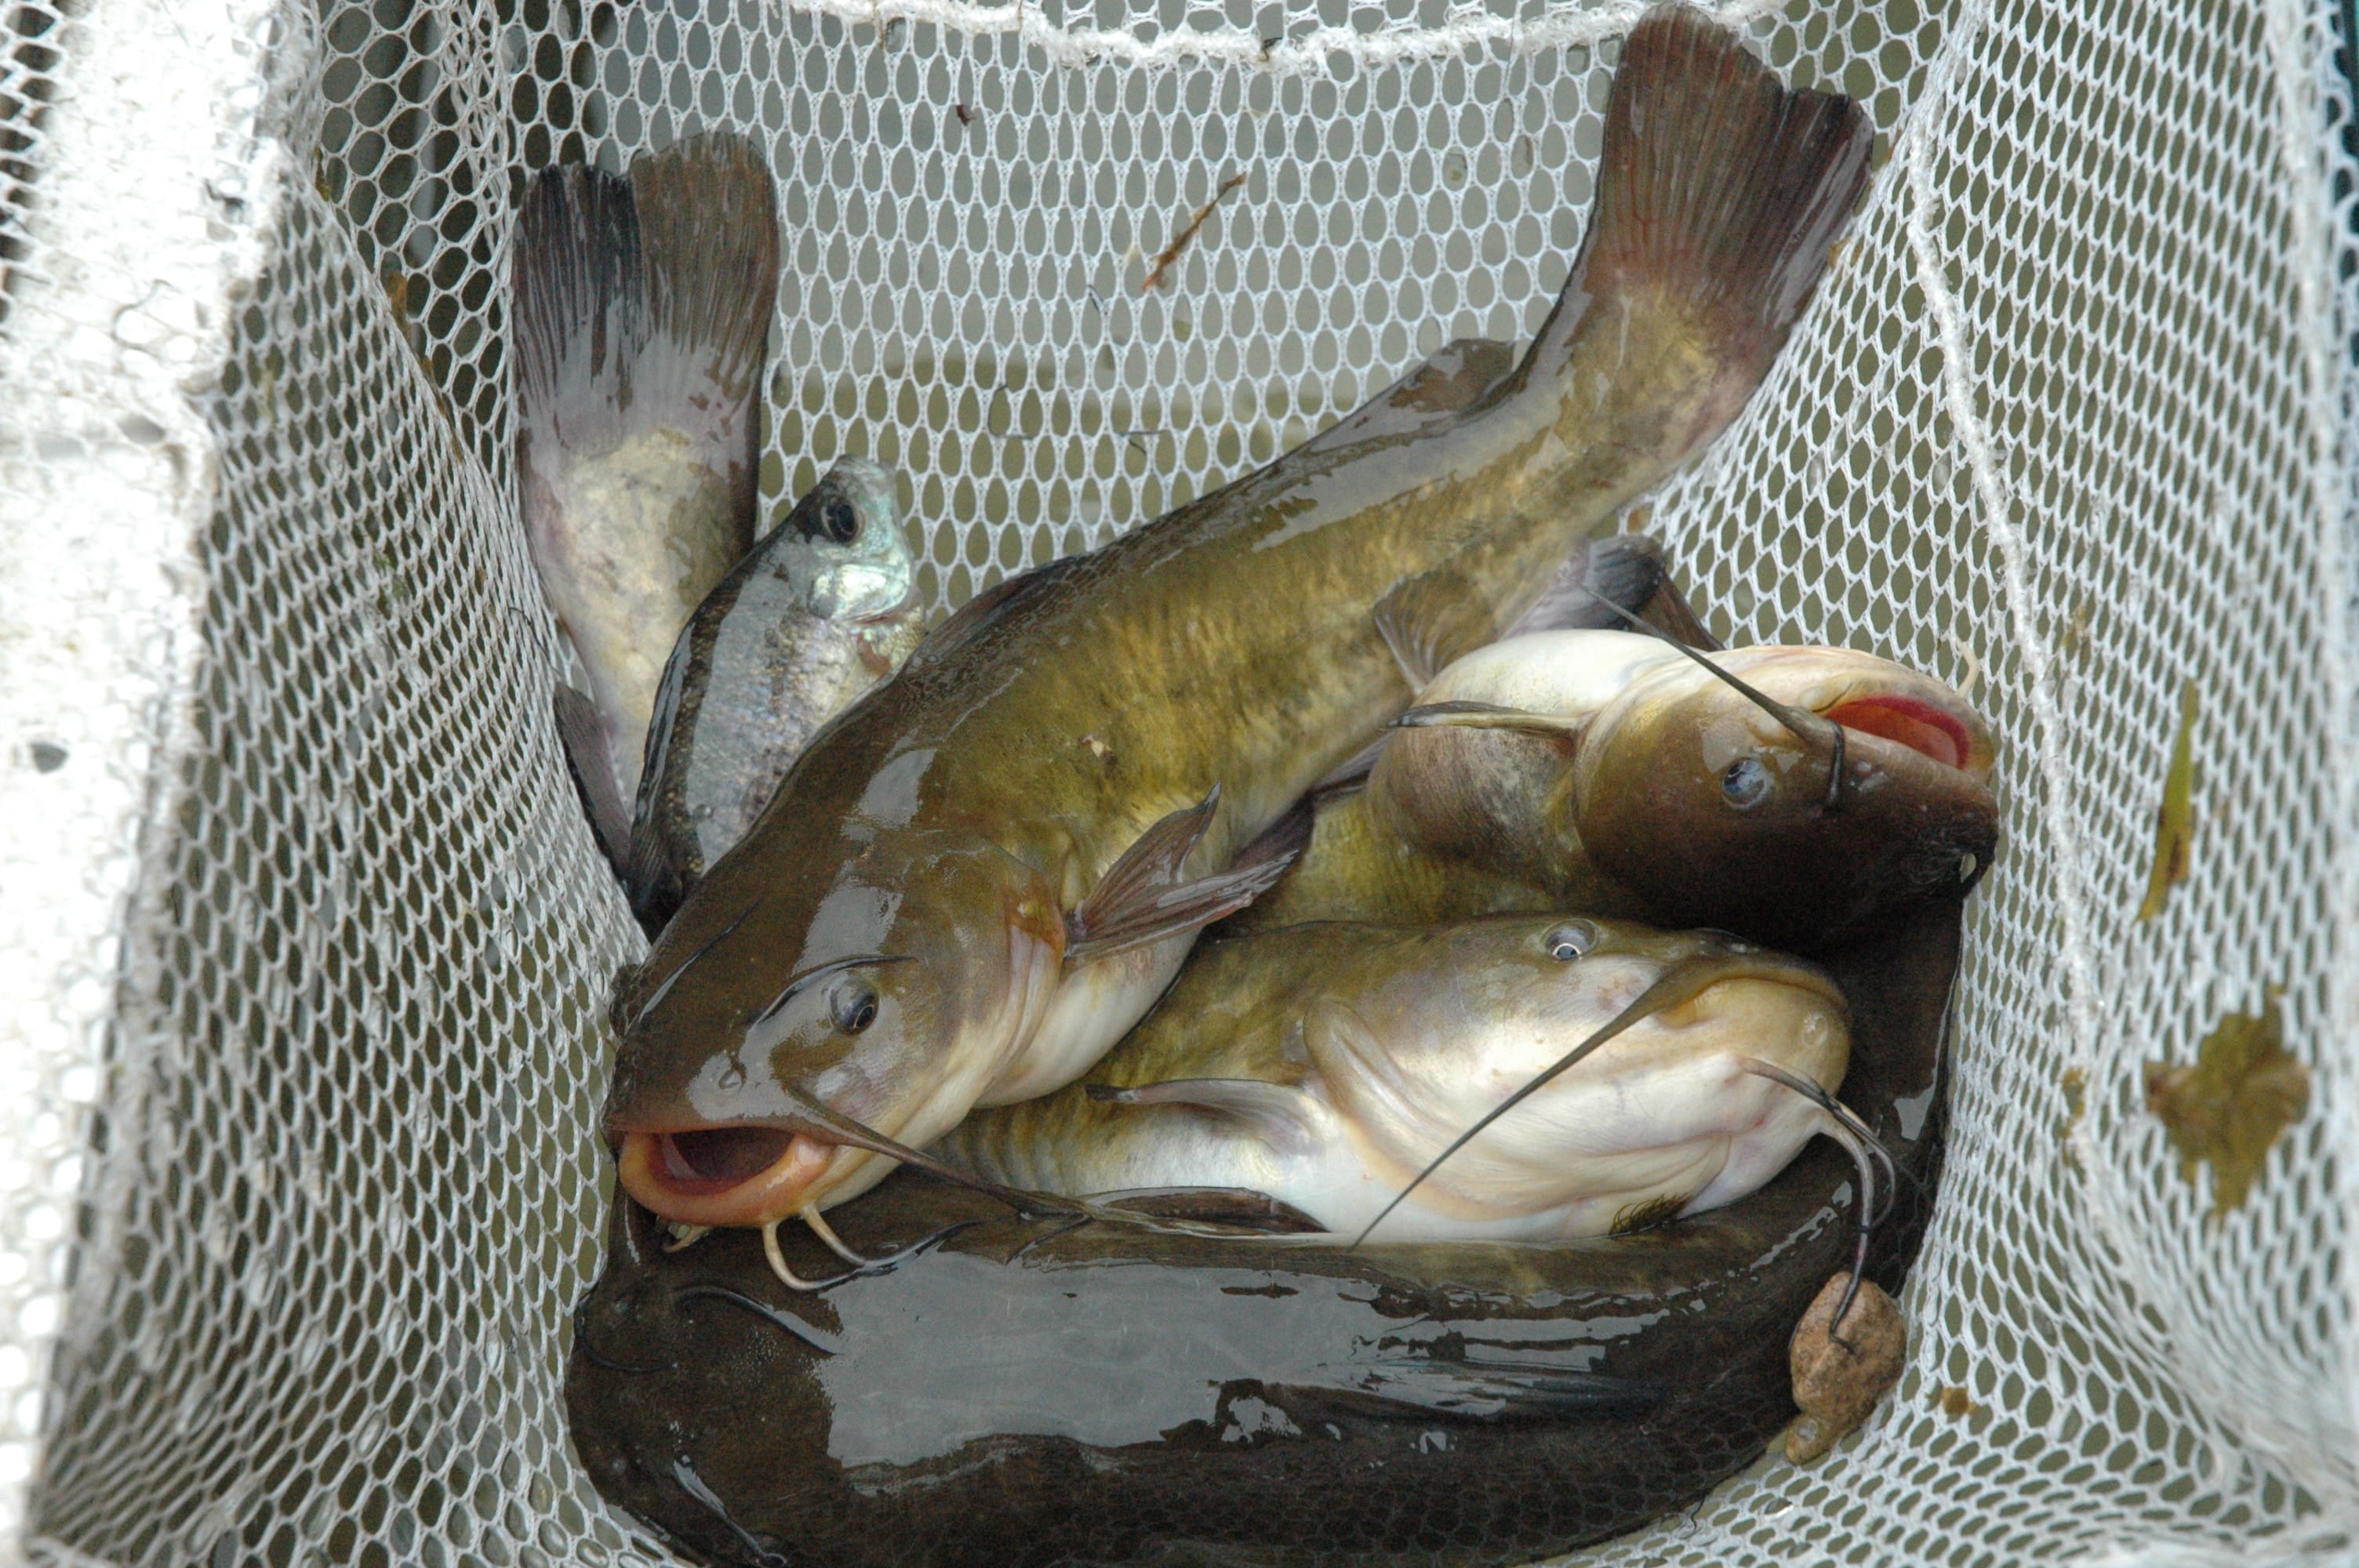 State biologists sampled Kress Lake near Kalama Tuesday and caught bullheads and a variety of panfish. The lake also is stocked with channel catfish.